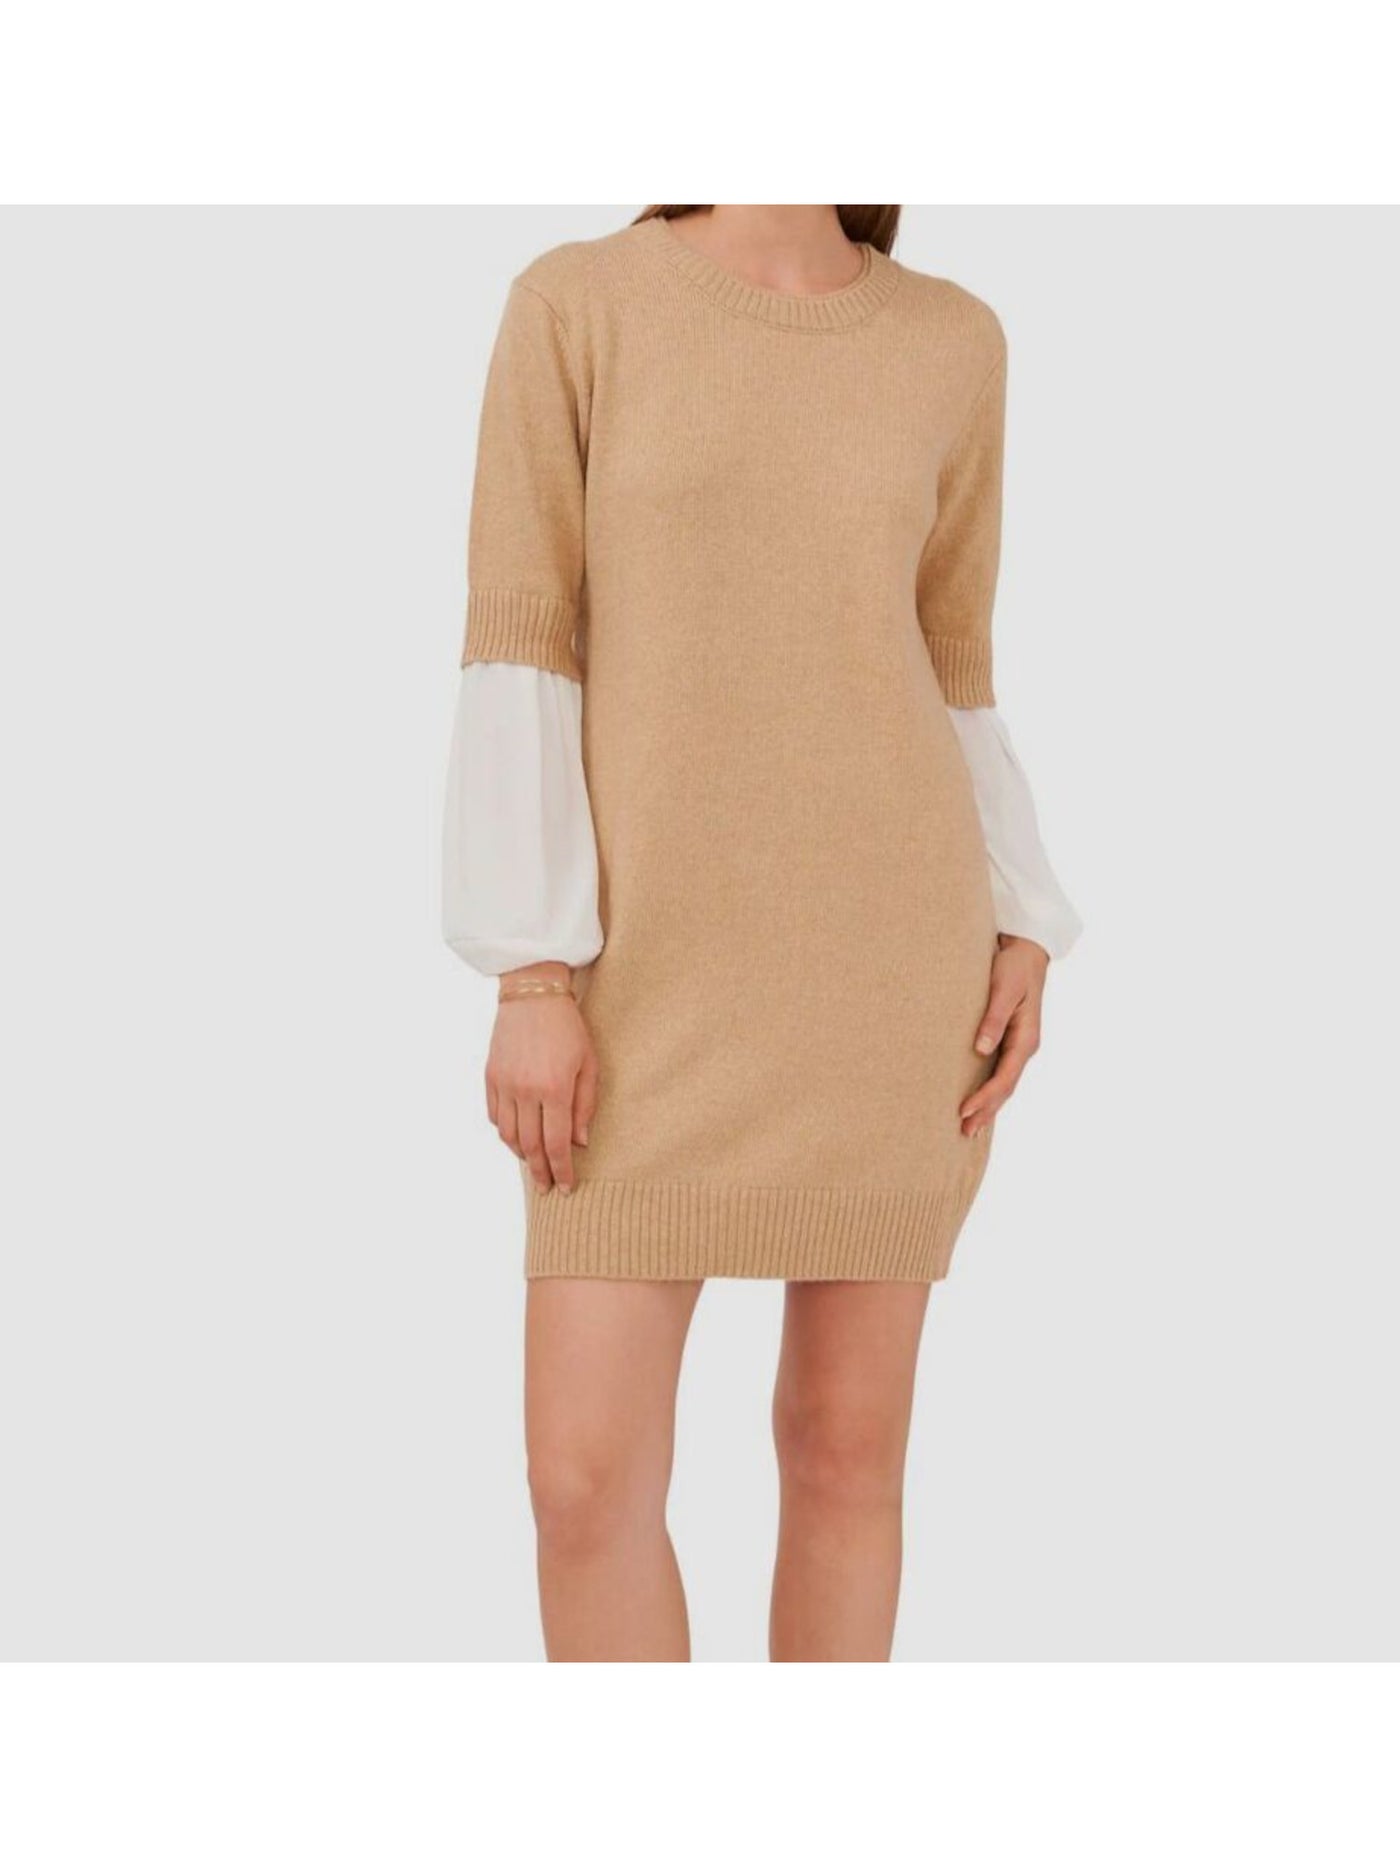 VINCE CAMUTO Womens Beige Long Sleeve Round Neck Knee Length Sweater Dress L